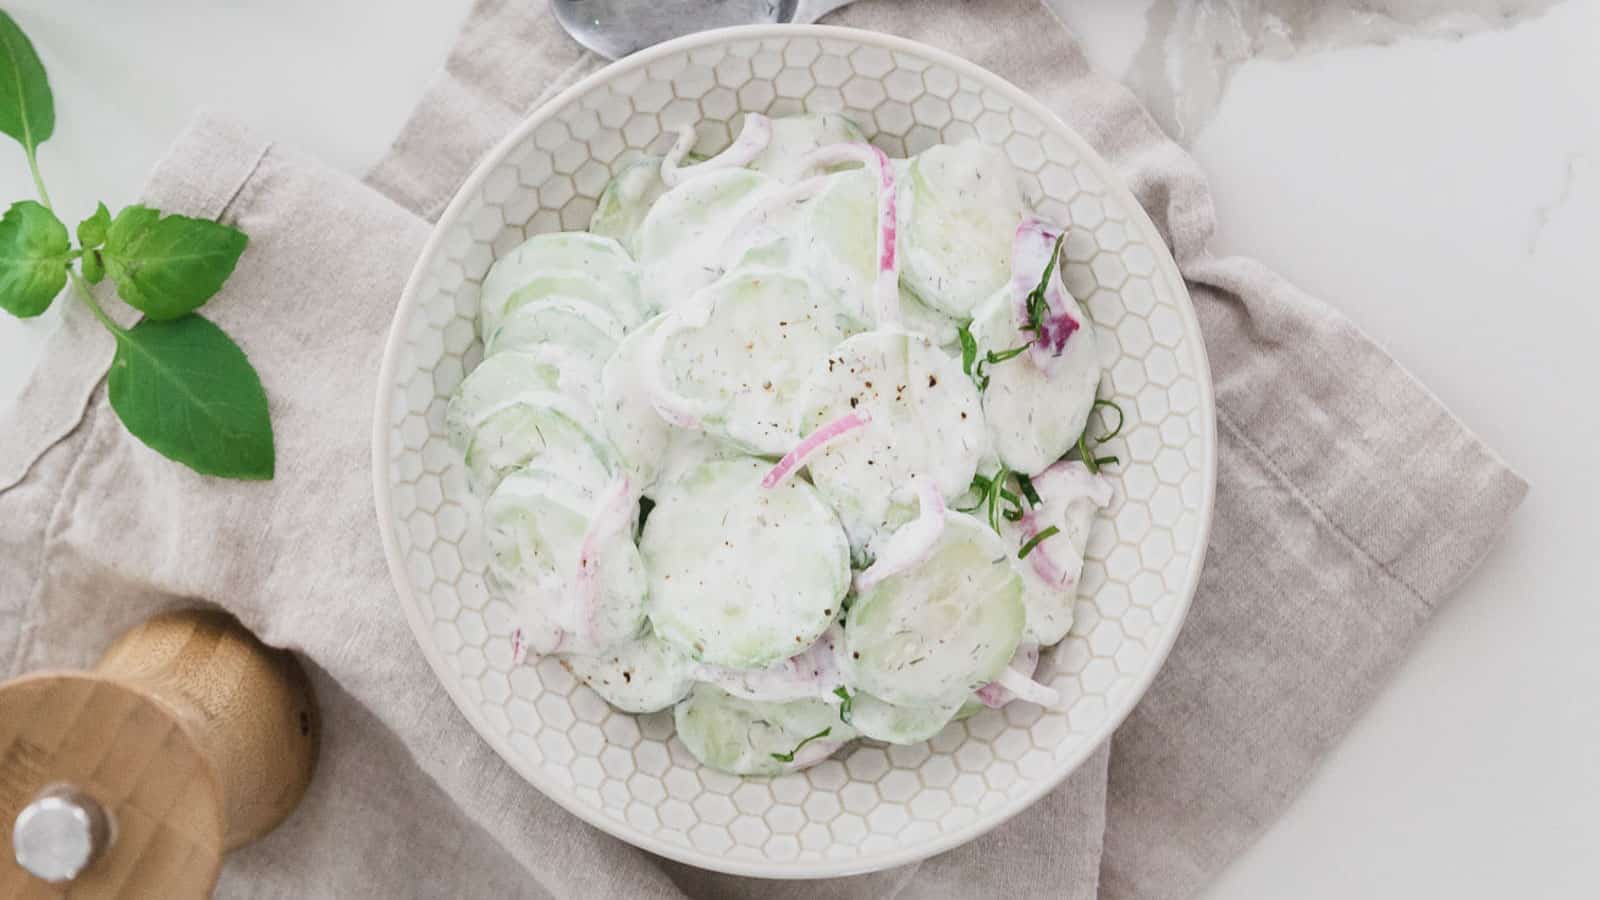 Creamy cucumber salad with pickled red onions in a white textured bowl.